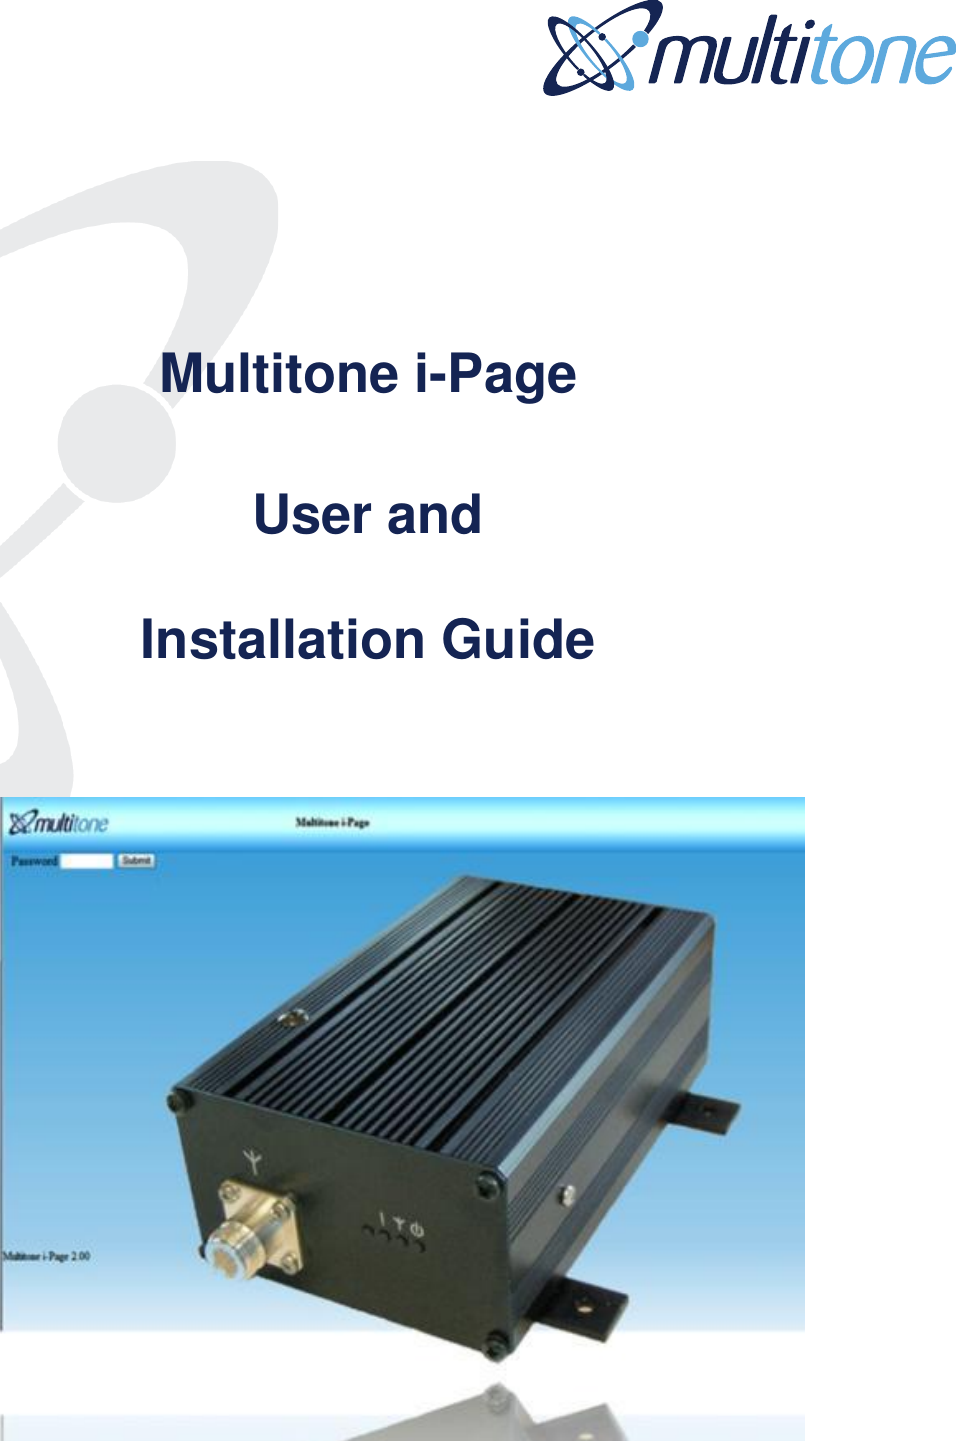         Multitone i-Page    User and   Installation Guide  